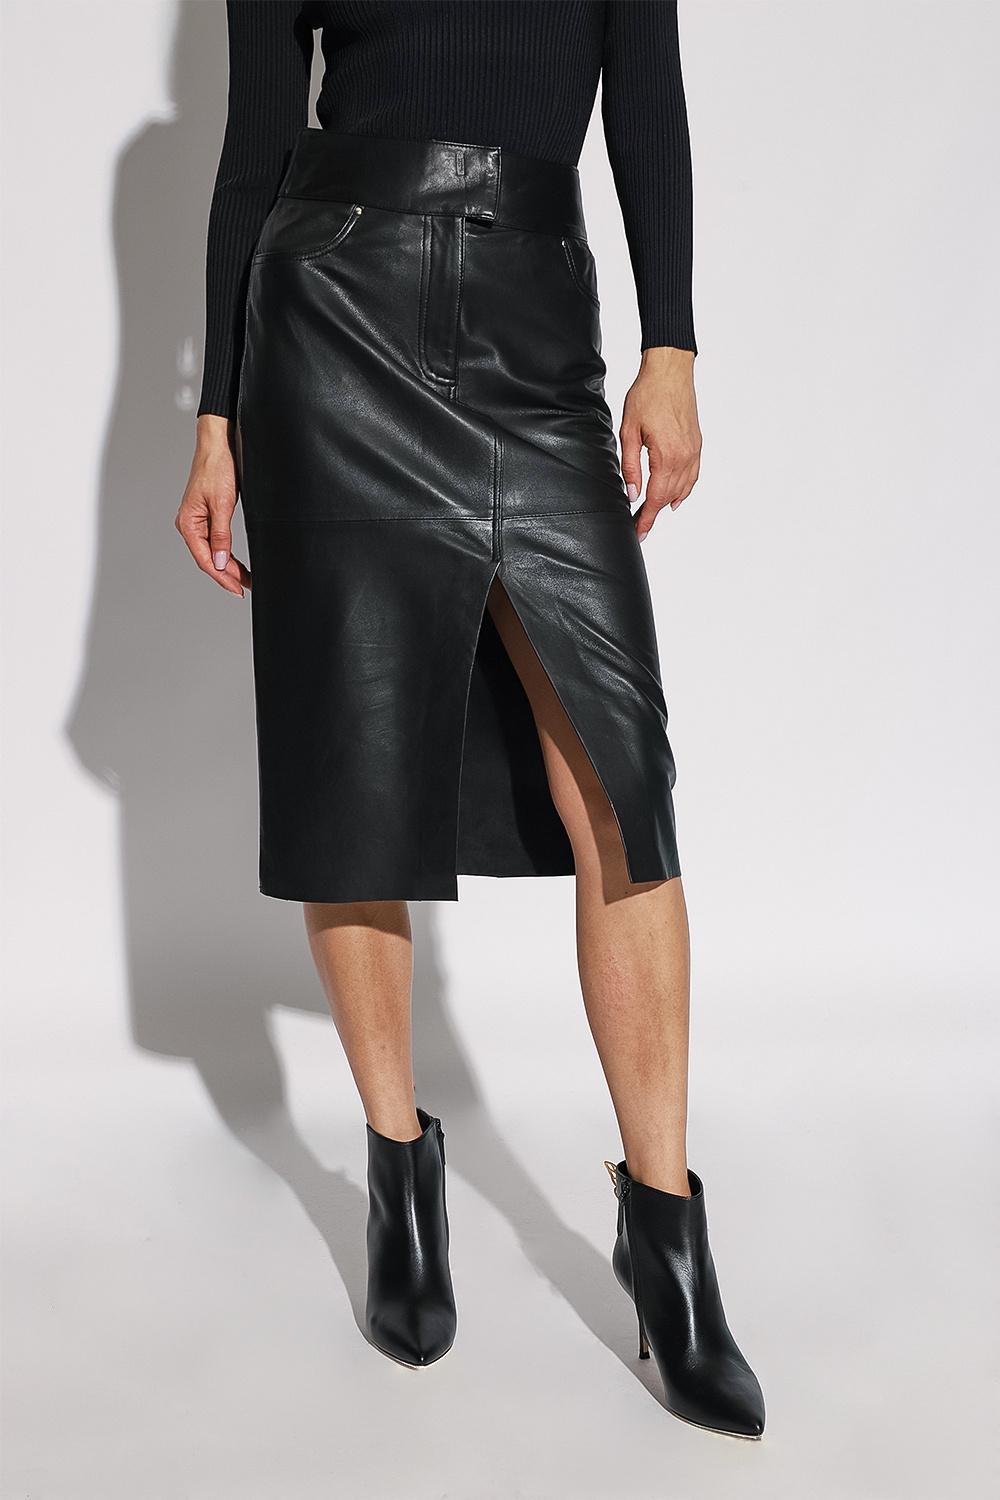 SneakersbeShops x NATIONAL MUSEUM IN WARSAW ‘Emma’ leather skirt